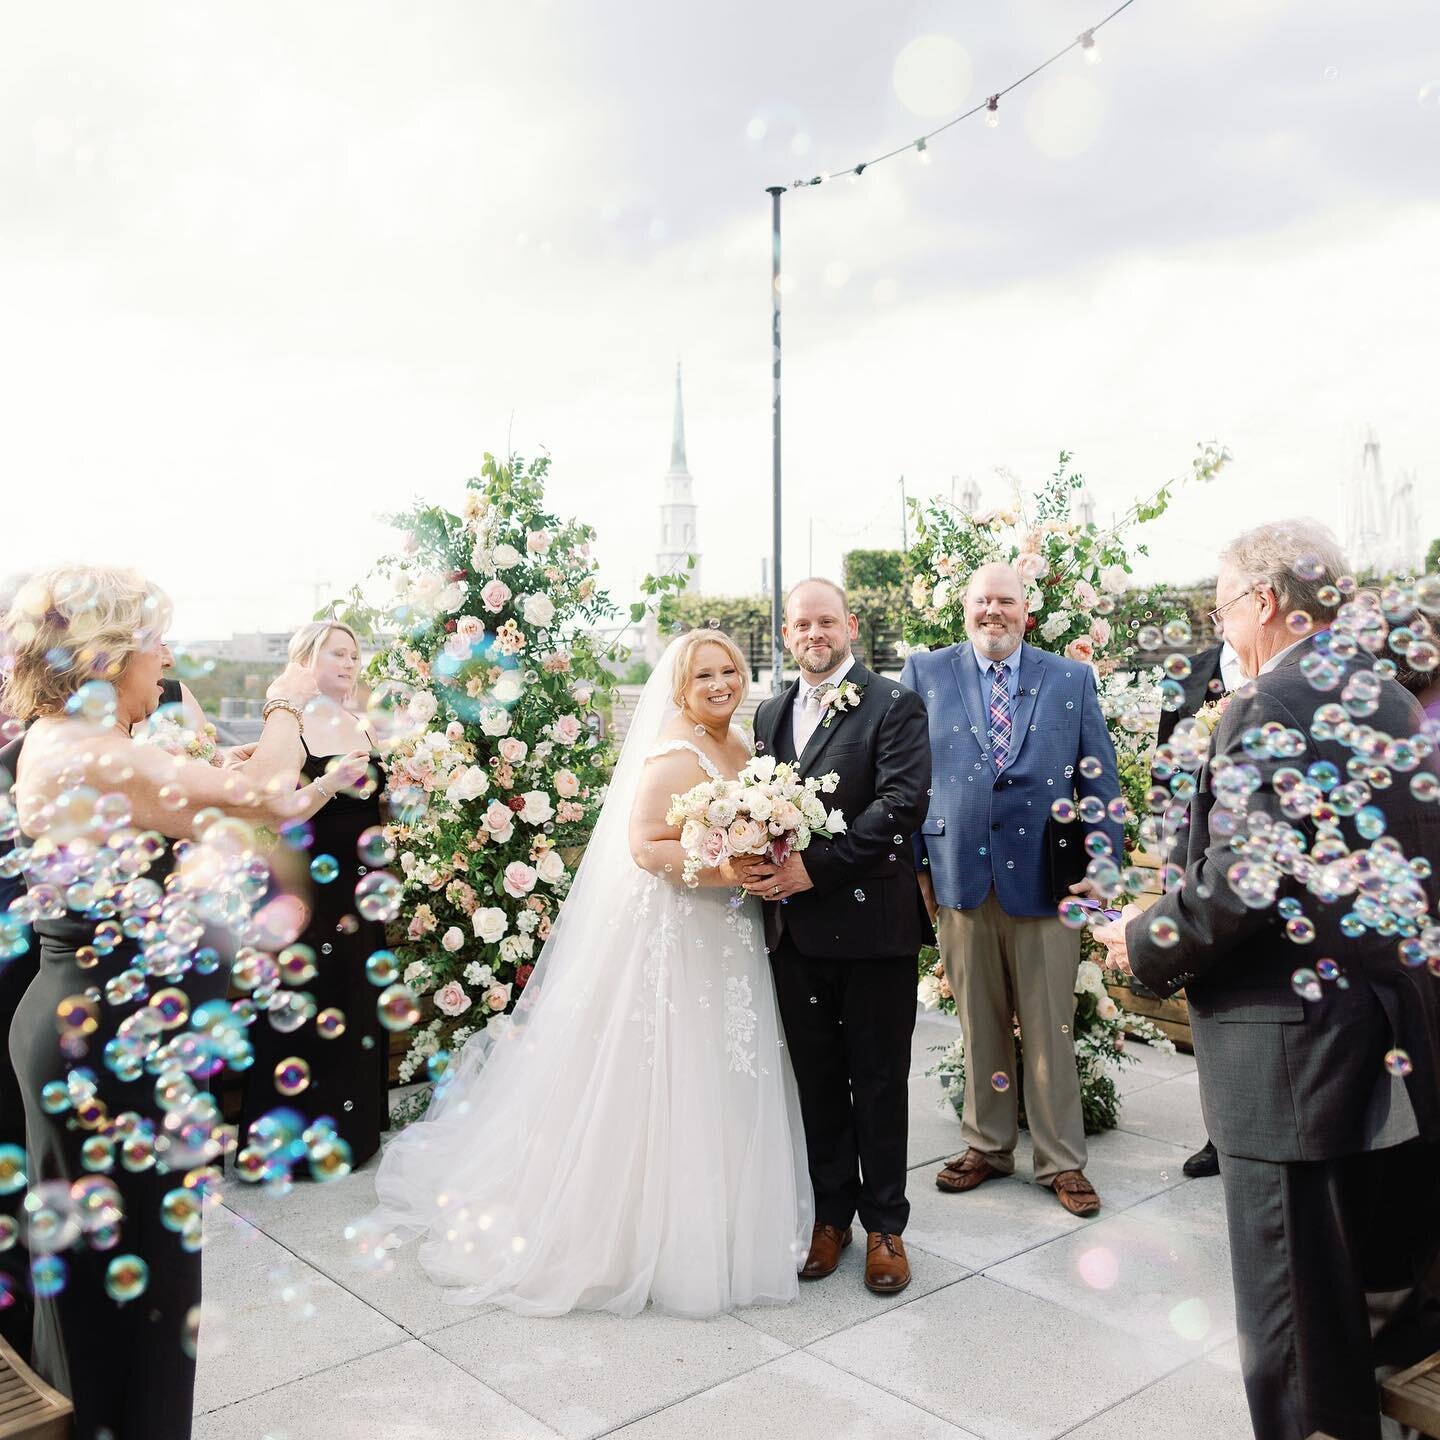 Stephanie&rsquo;s smile says it all! How could you not be over the moon surrounded by love, flowers, and bubbles?! 🤍🌸🫧

Photographer | @izzyhudgins 
Florals | @marbleandpine 
Venue | @perrylane_weddings 
Dress | @ivoryandbeau 
HMU | @beyondbeautif